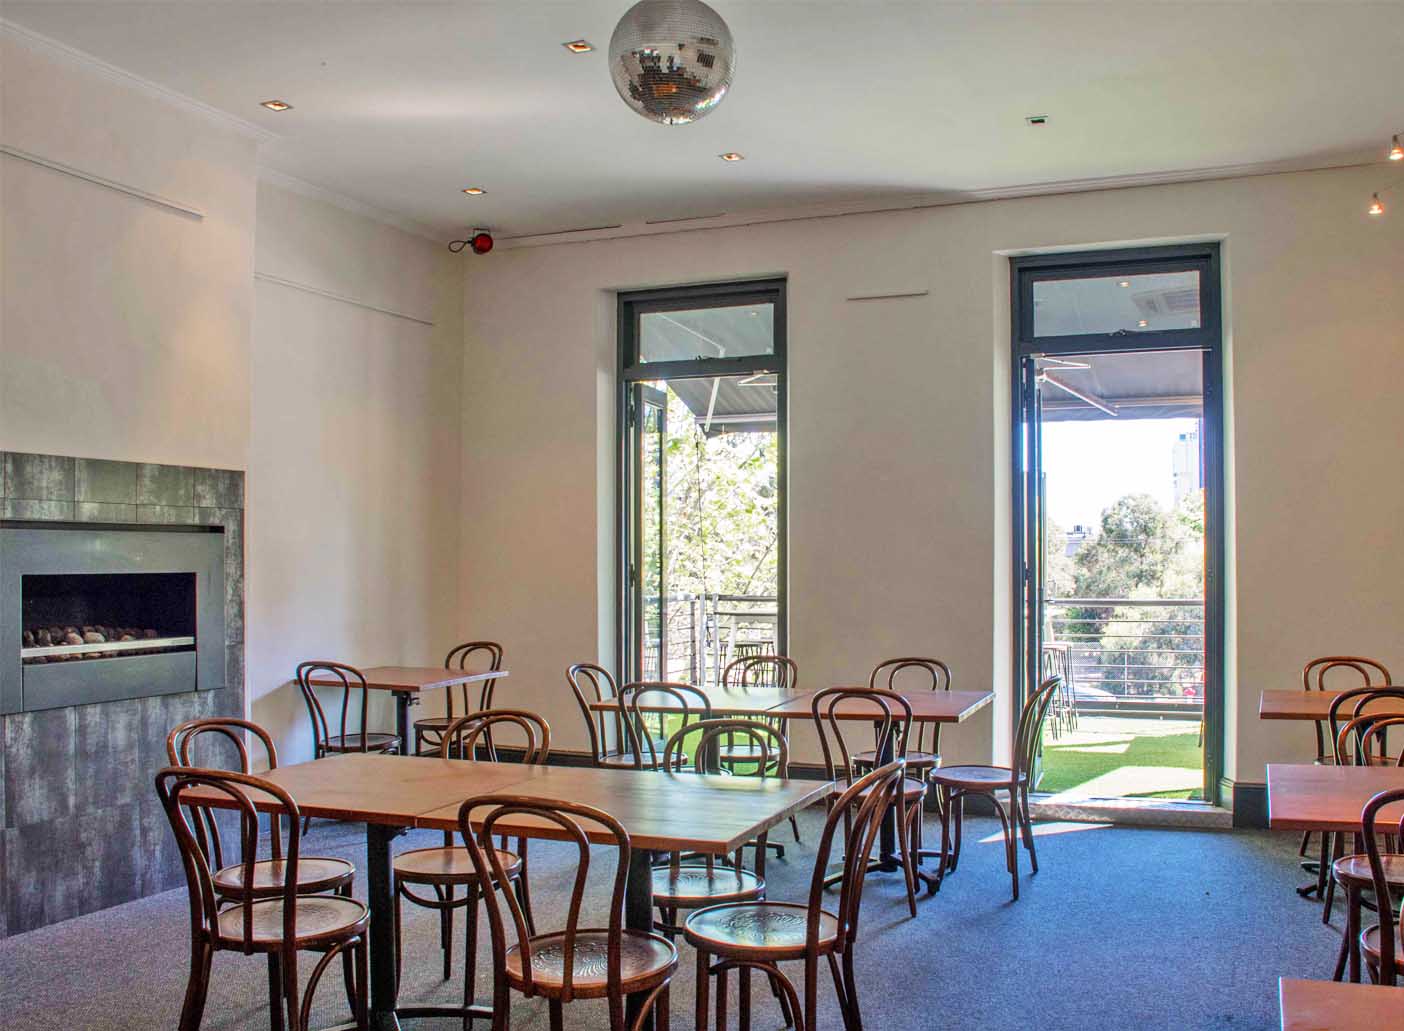 Crown & Sceptre Hotel <br> Heritage-Listed Dining